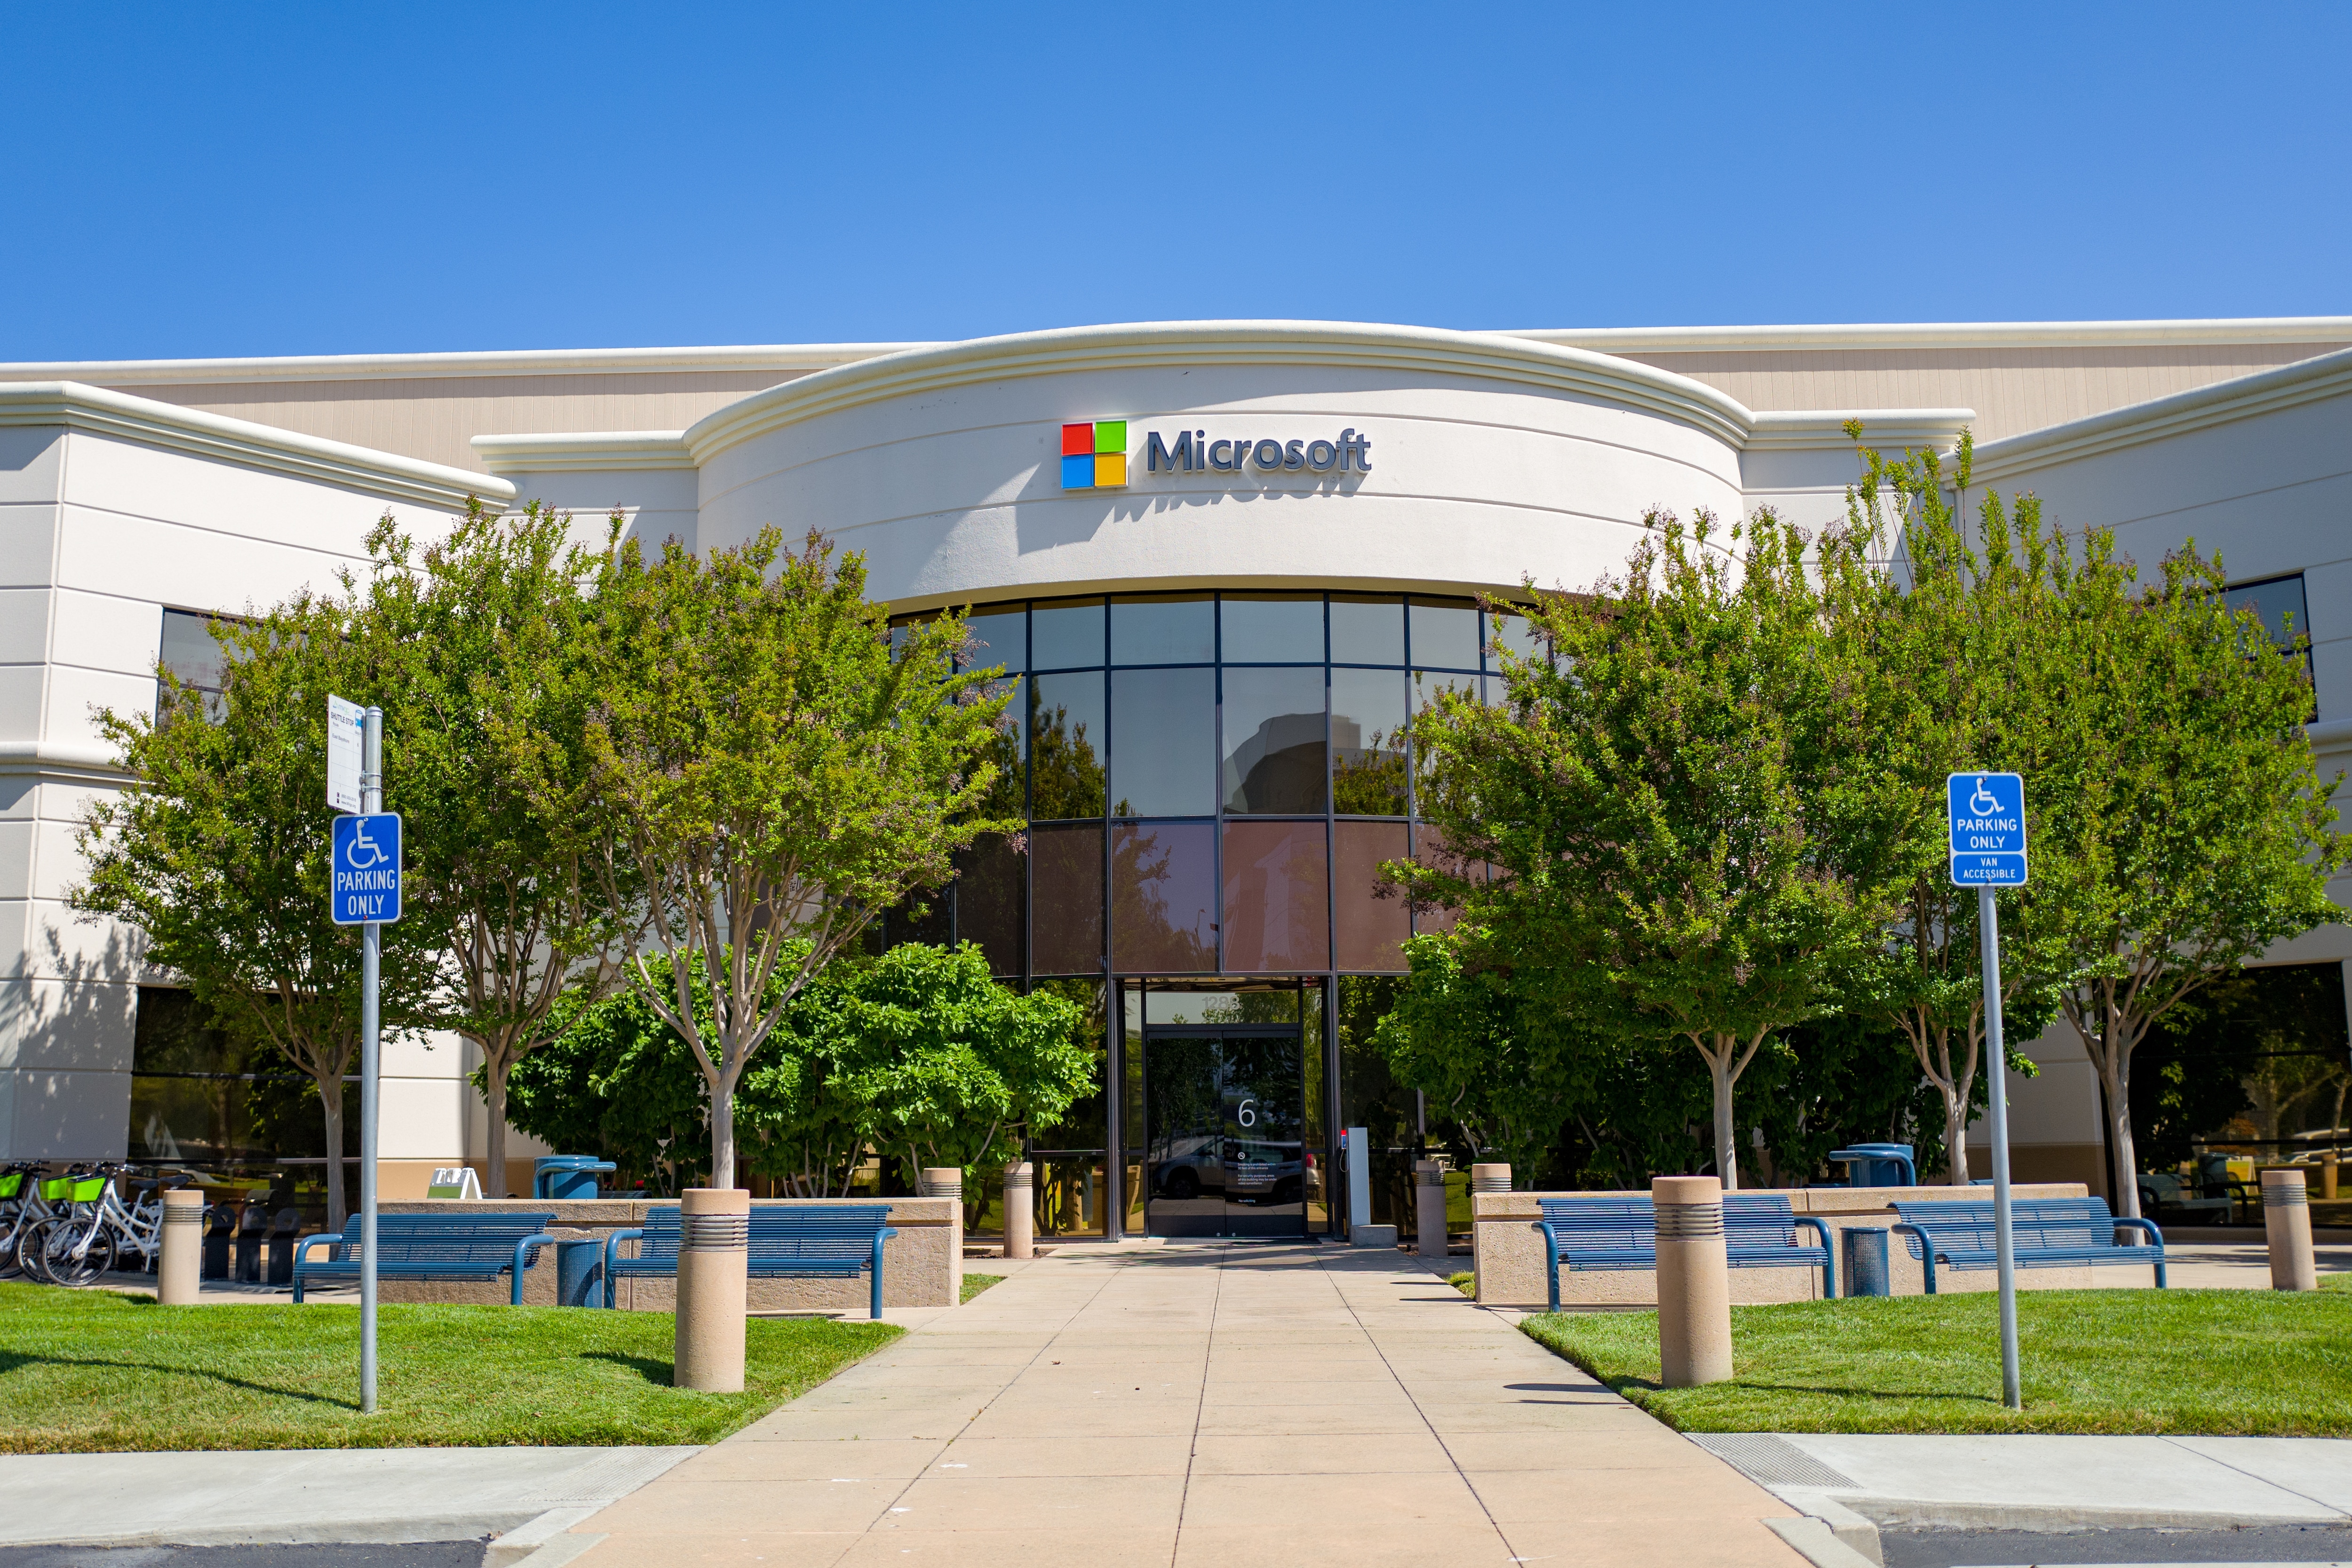 Facade with sign and logo at regional headquarters of computing company Microsoft in the Silicon Valley, Mountain View, California, May 3, 2019. (Photo by Smith Collection/Gado/Getty Images)